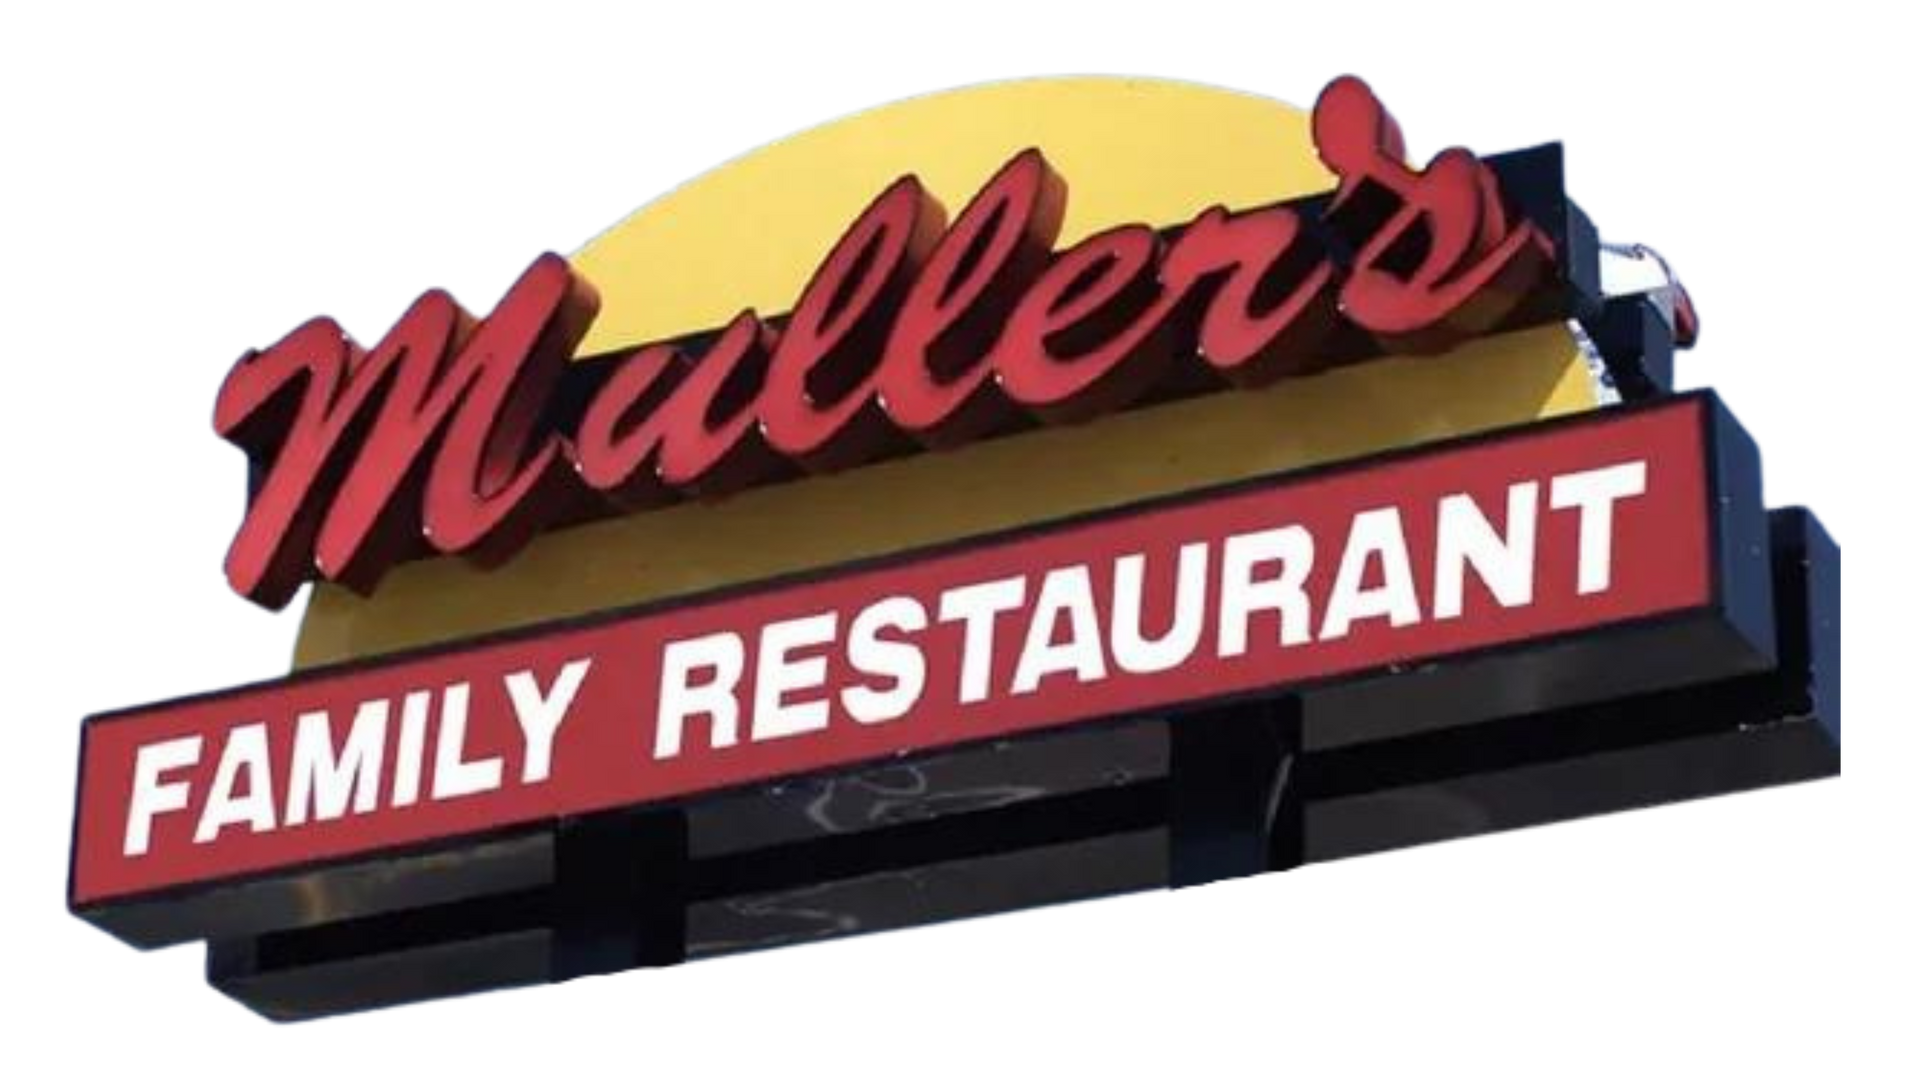 A sign for muller 's family restaurant against a white background near adventure sports